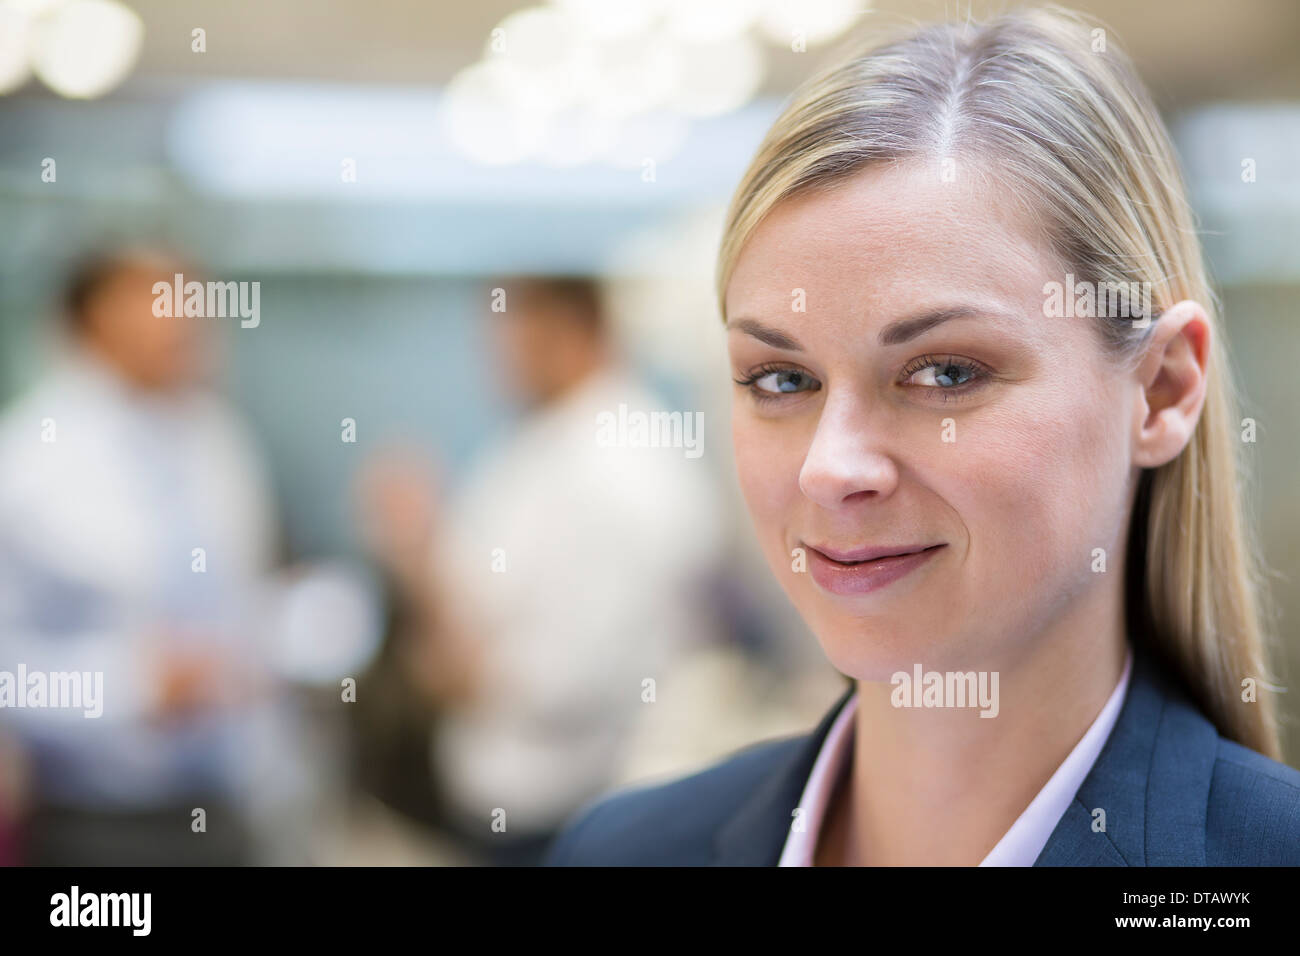 Pretty Businesswoman posing while colleagues talking together in office, à huis clos Banque D'Images